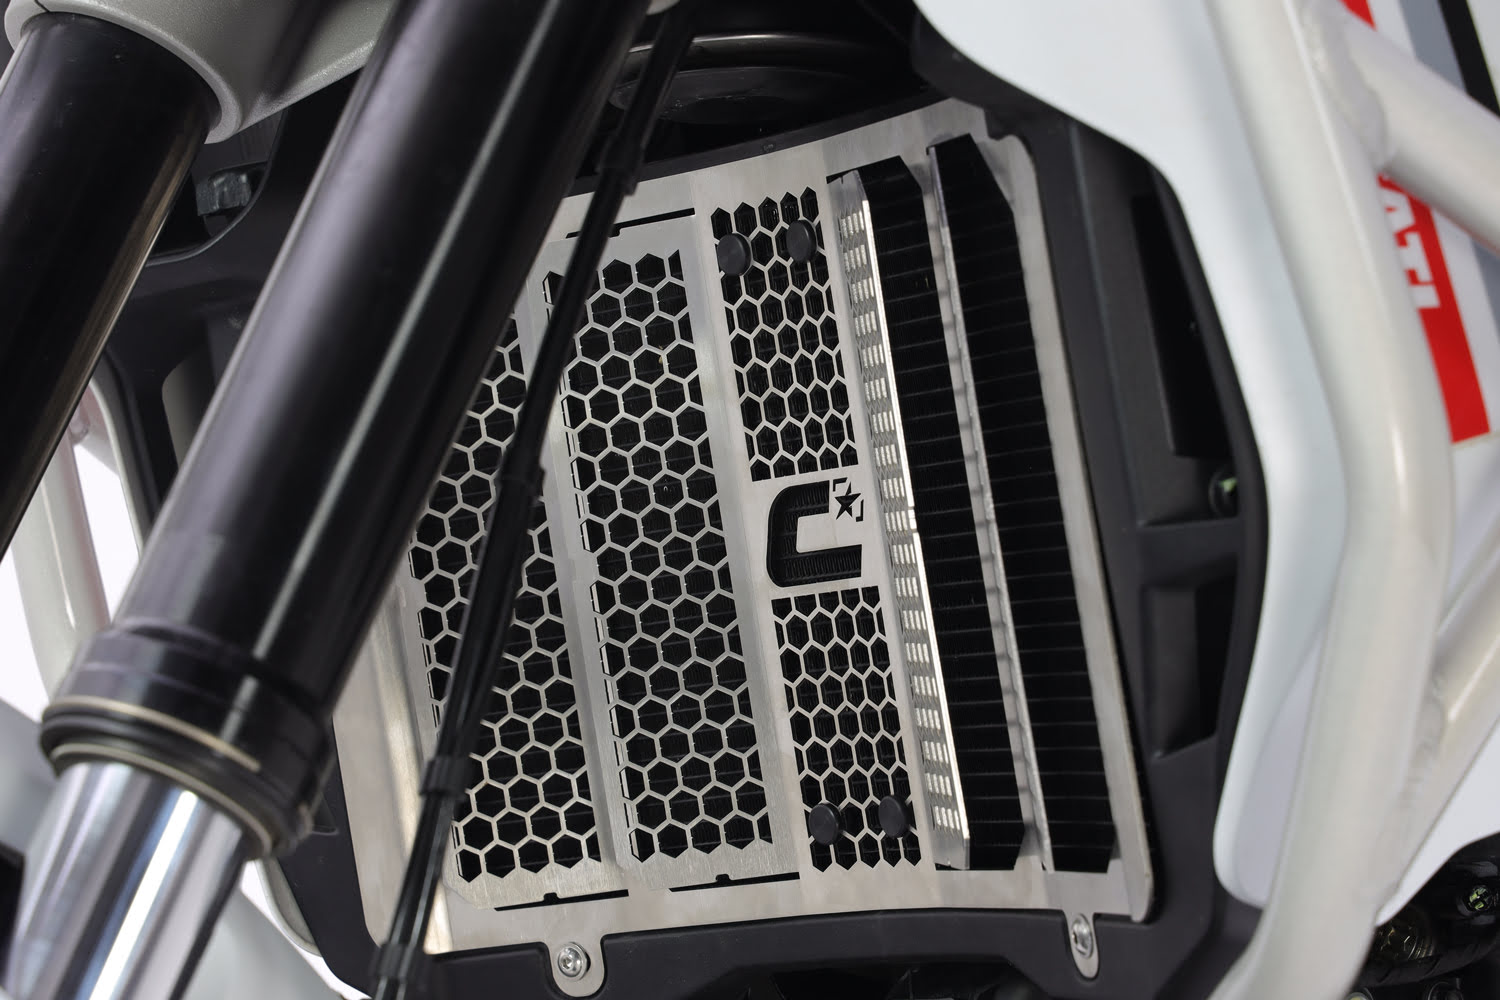 Trail Radiator Protection Grids - 2CP22700850014.JPG